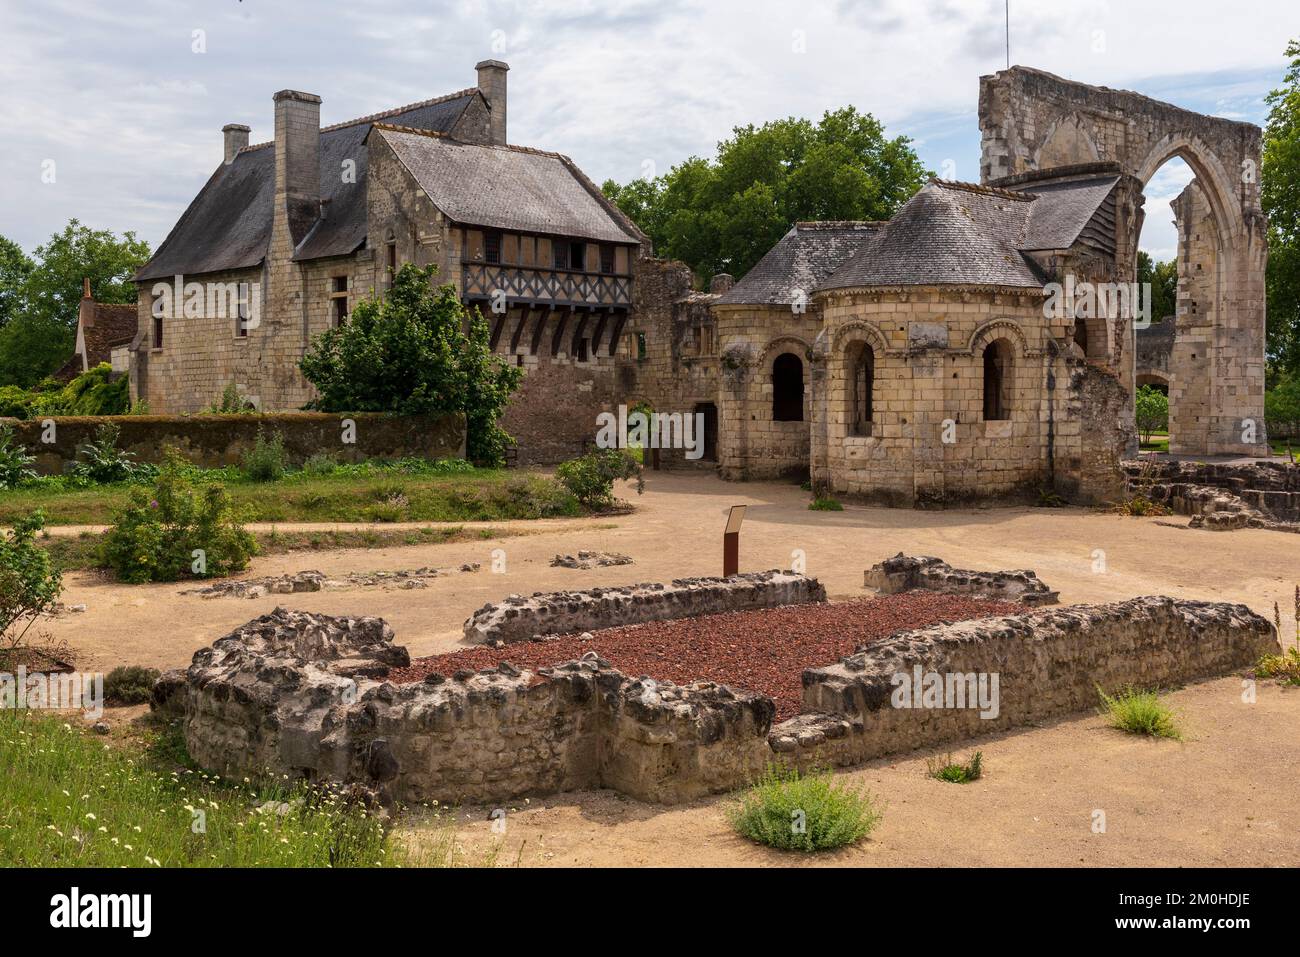 France, Indre et Loire, La Riche, Loire Valley listed as World Heritage by UNESCO, Saint Cosme priory, Ronsard residence, prior's house and 12th century church Stock Photo